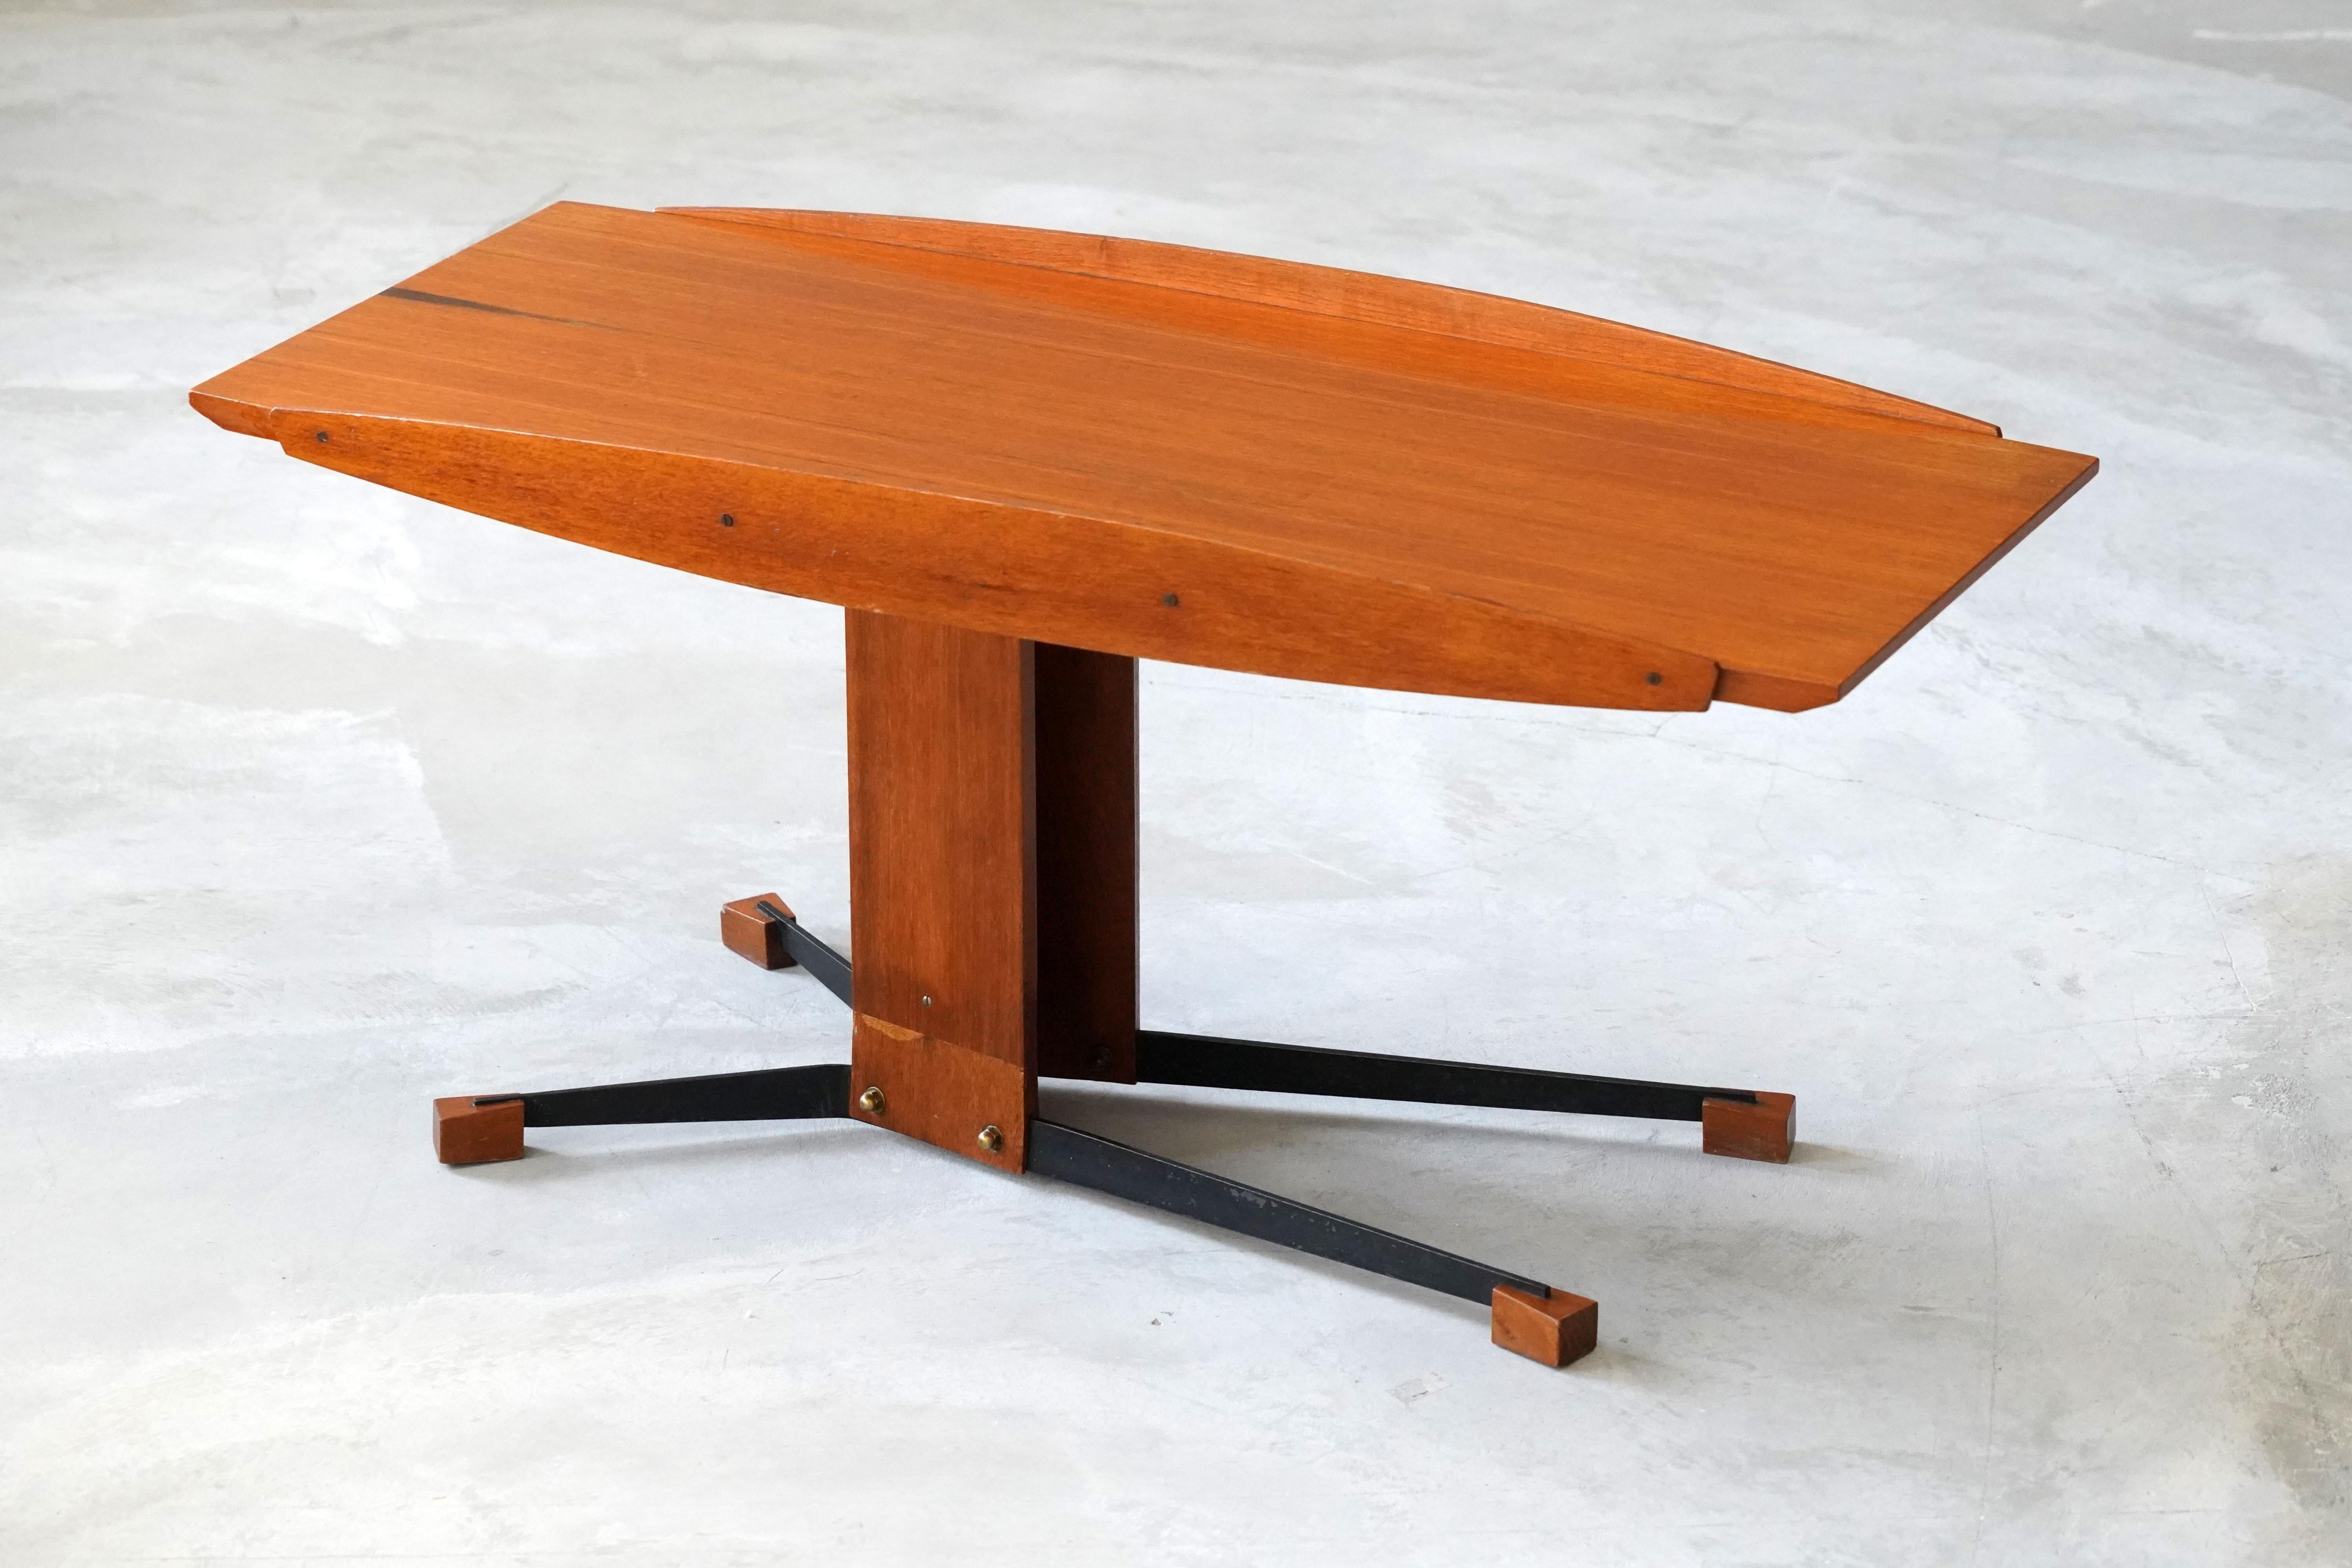 A modernist coffee table / cocktail table. Designed and produced in Italy, 1950s. Executed in stained metal, brass and teak. Can also be utilized as an occasional or end table.

Other designers of the period include Gio Ponti, Ico Parisi, Franco